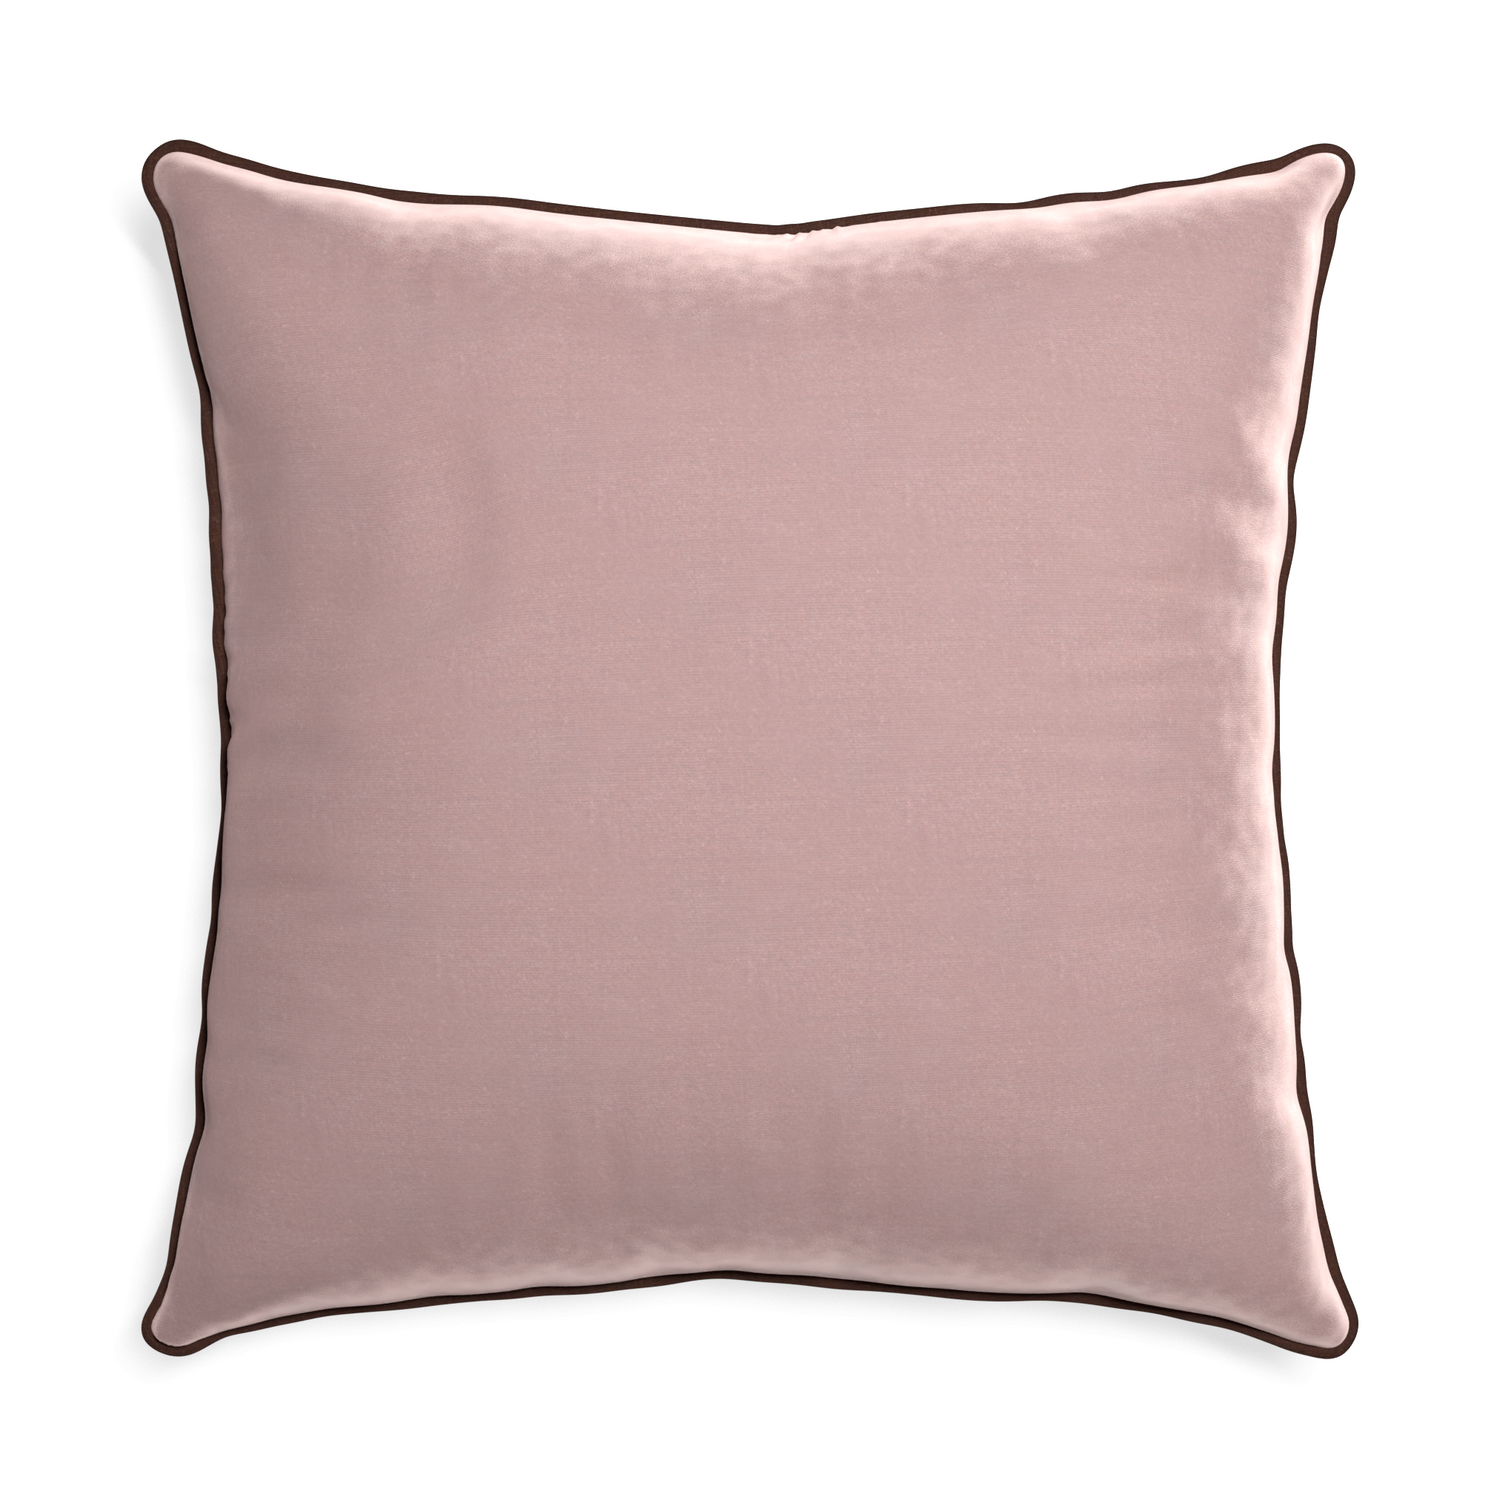 square mauve velvet pillow with brown piping